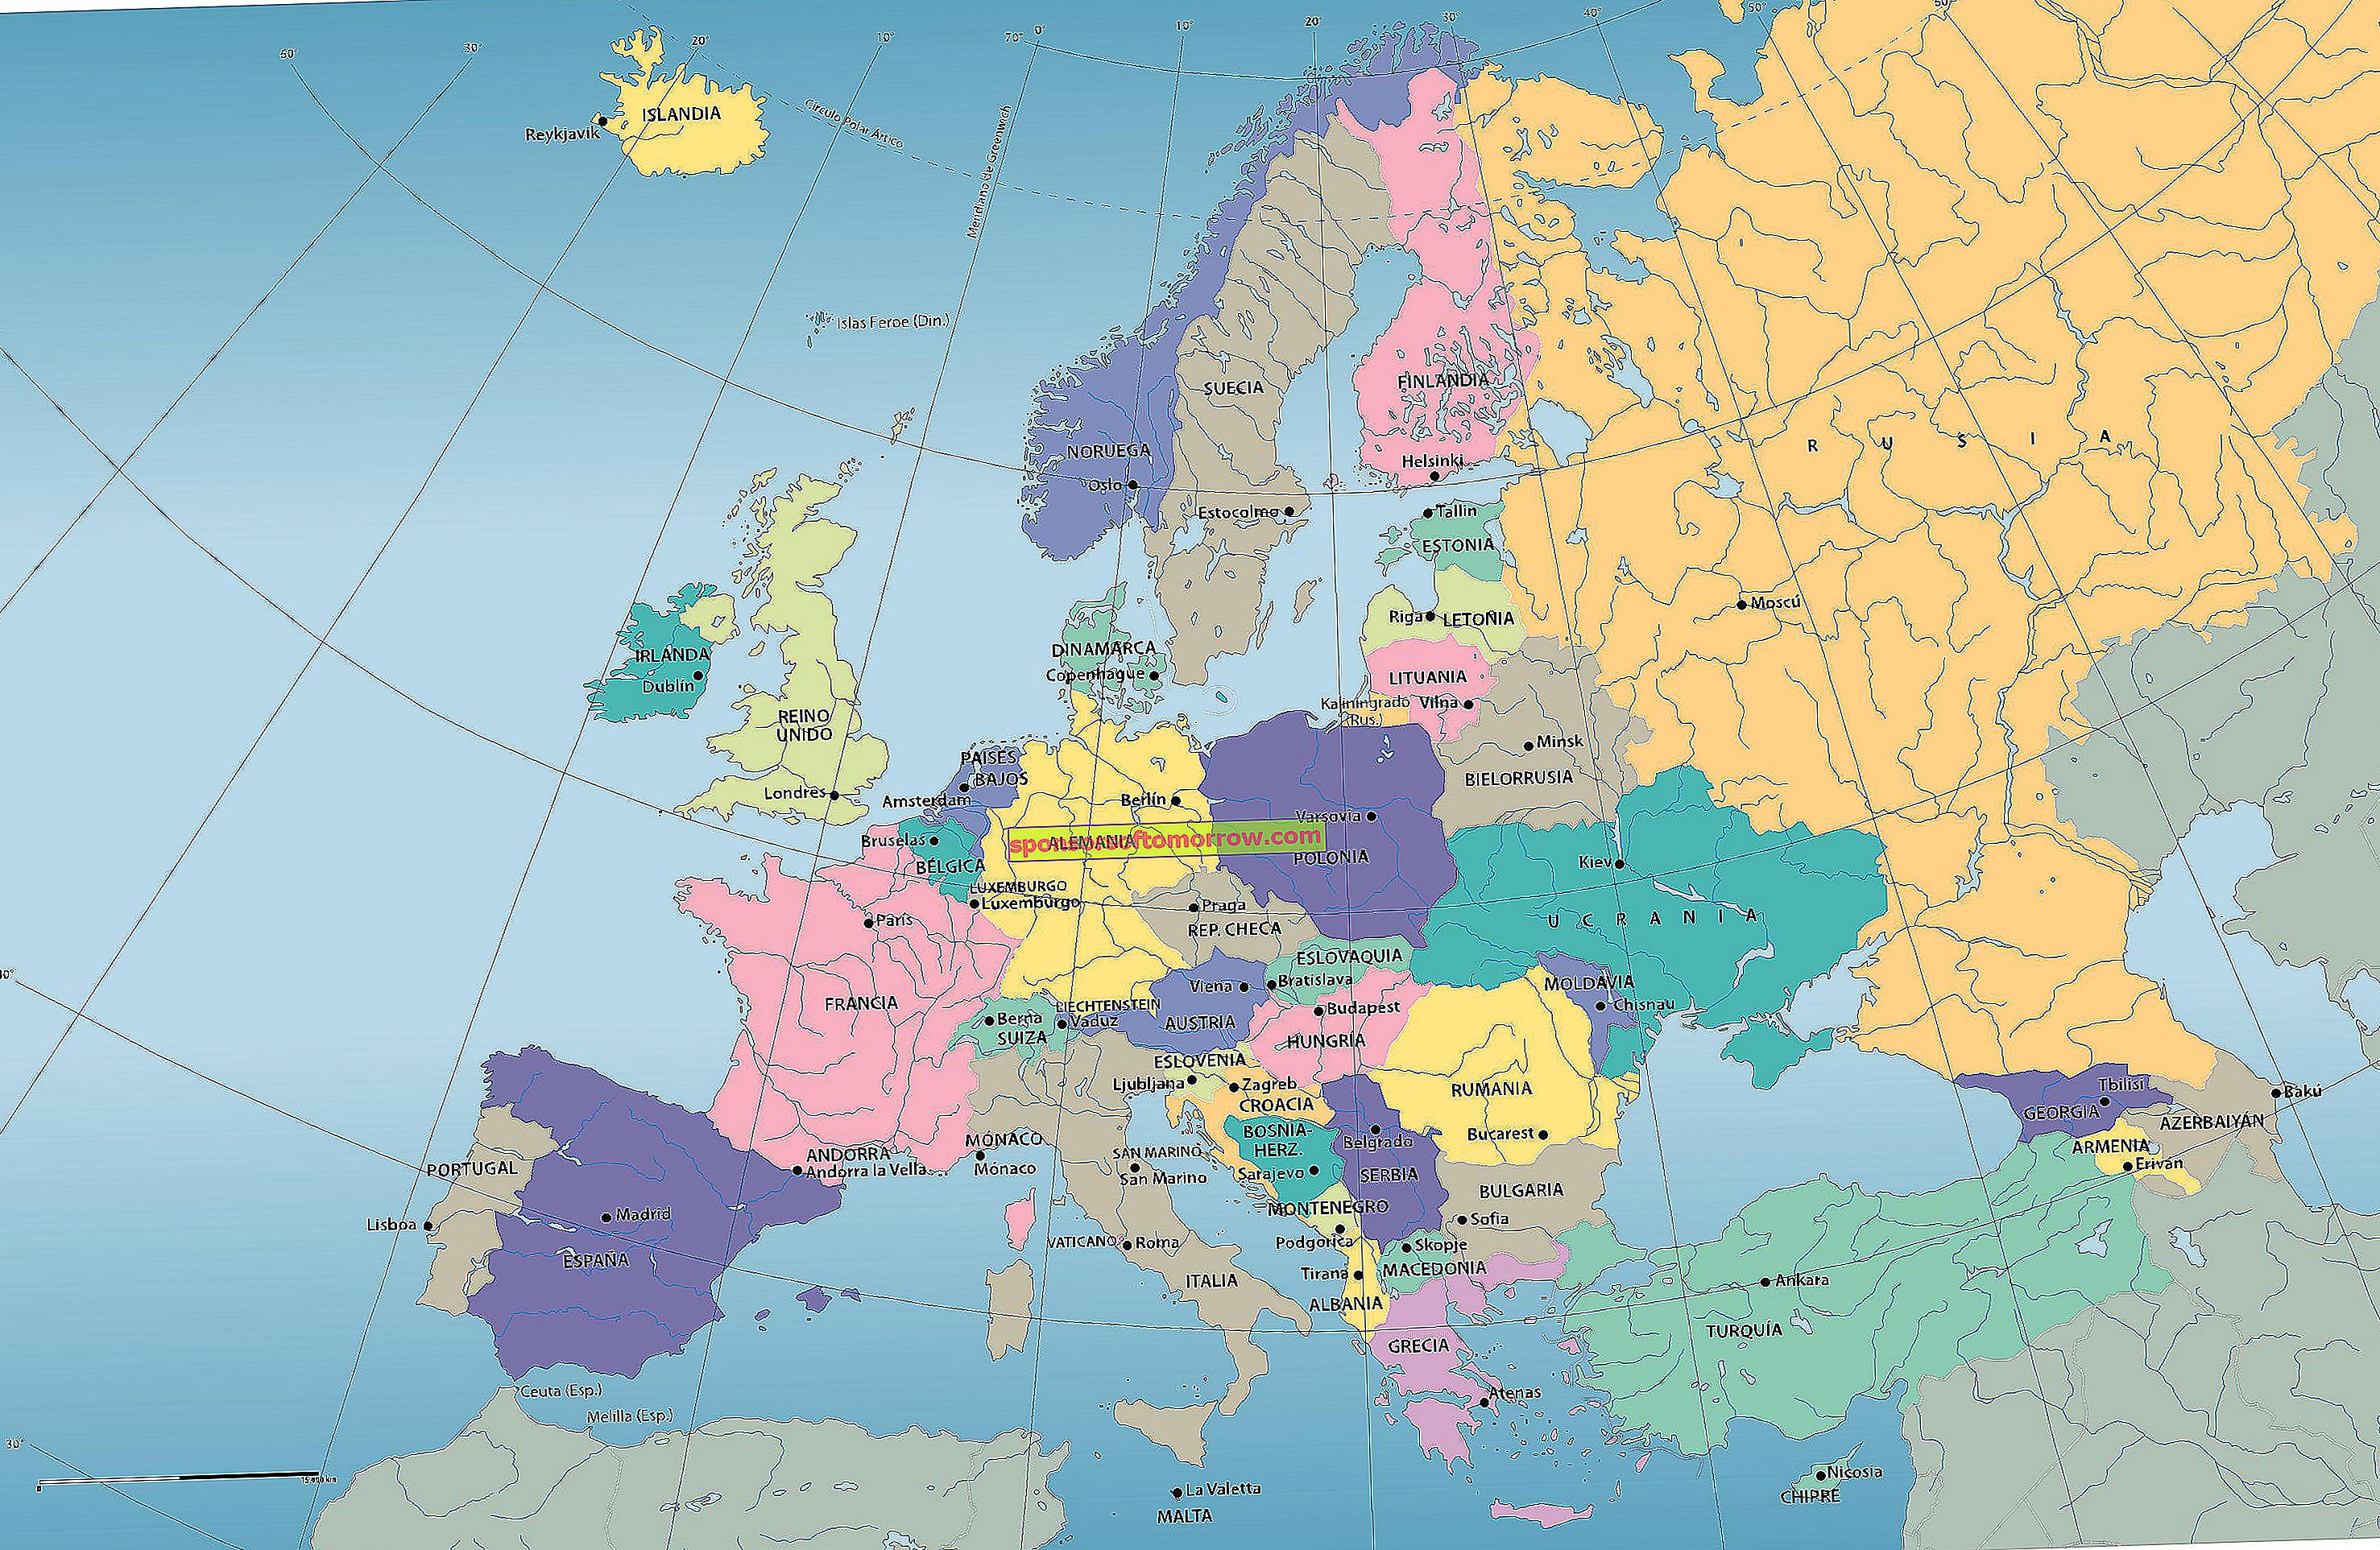 another political map of europe